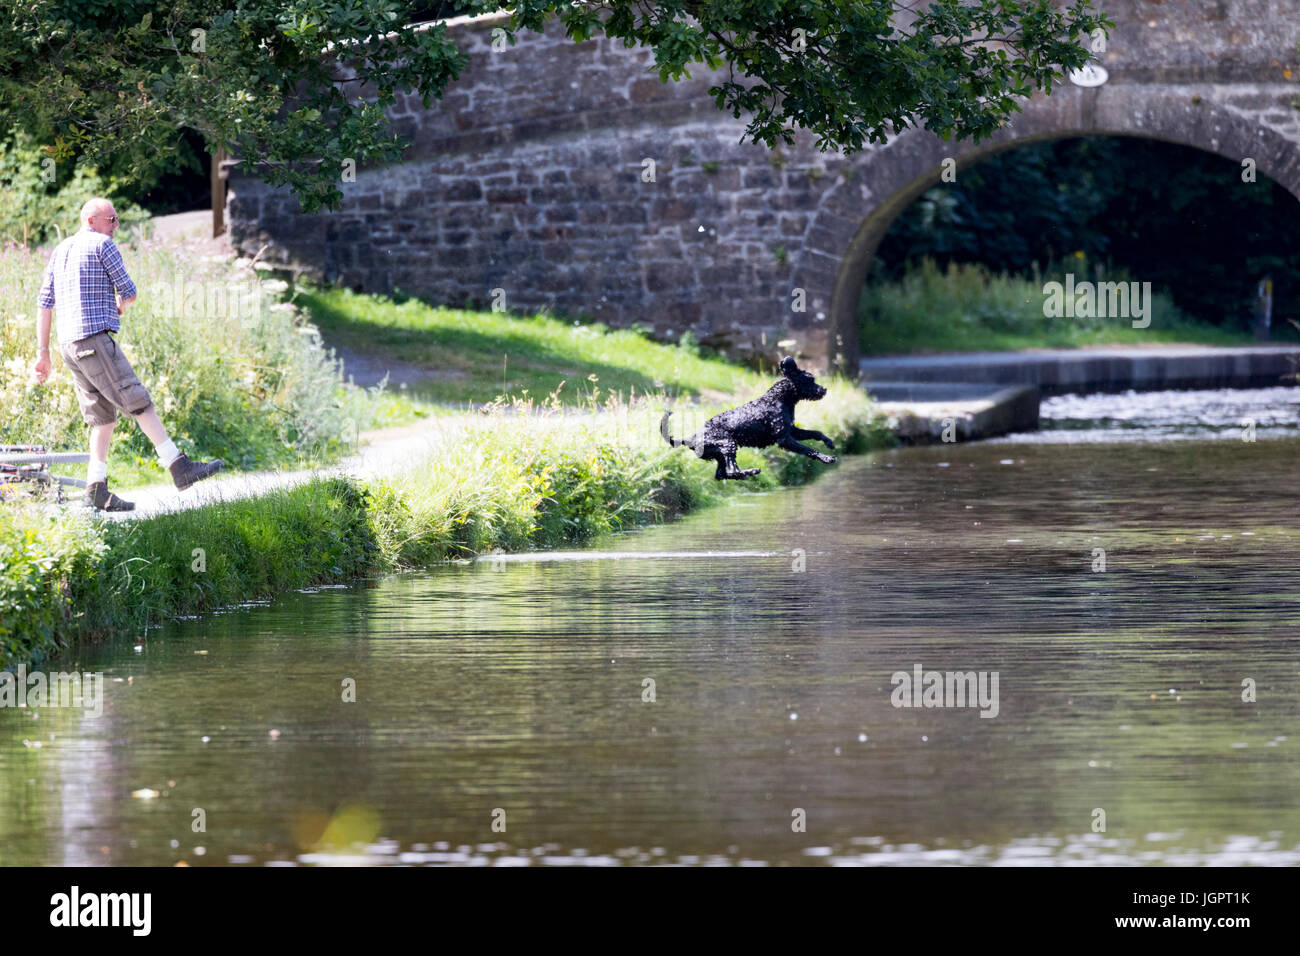 A dog owner throwing a ball into the Llangollen Canal whilst his dog is in mid air as it jumps after it to cool down on a hot summers day, Llangollen, Wales, UK Stock Photo